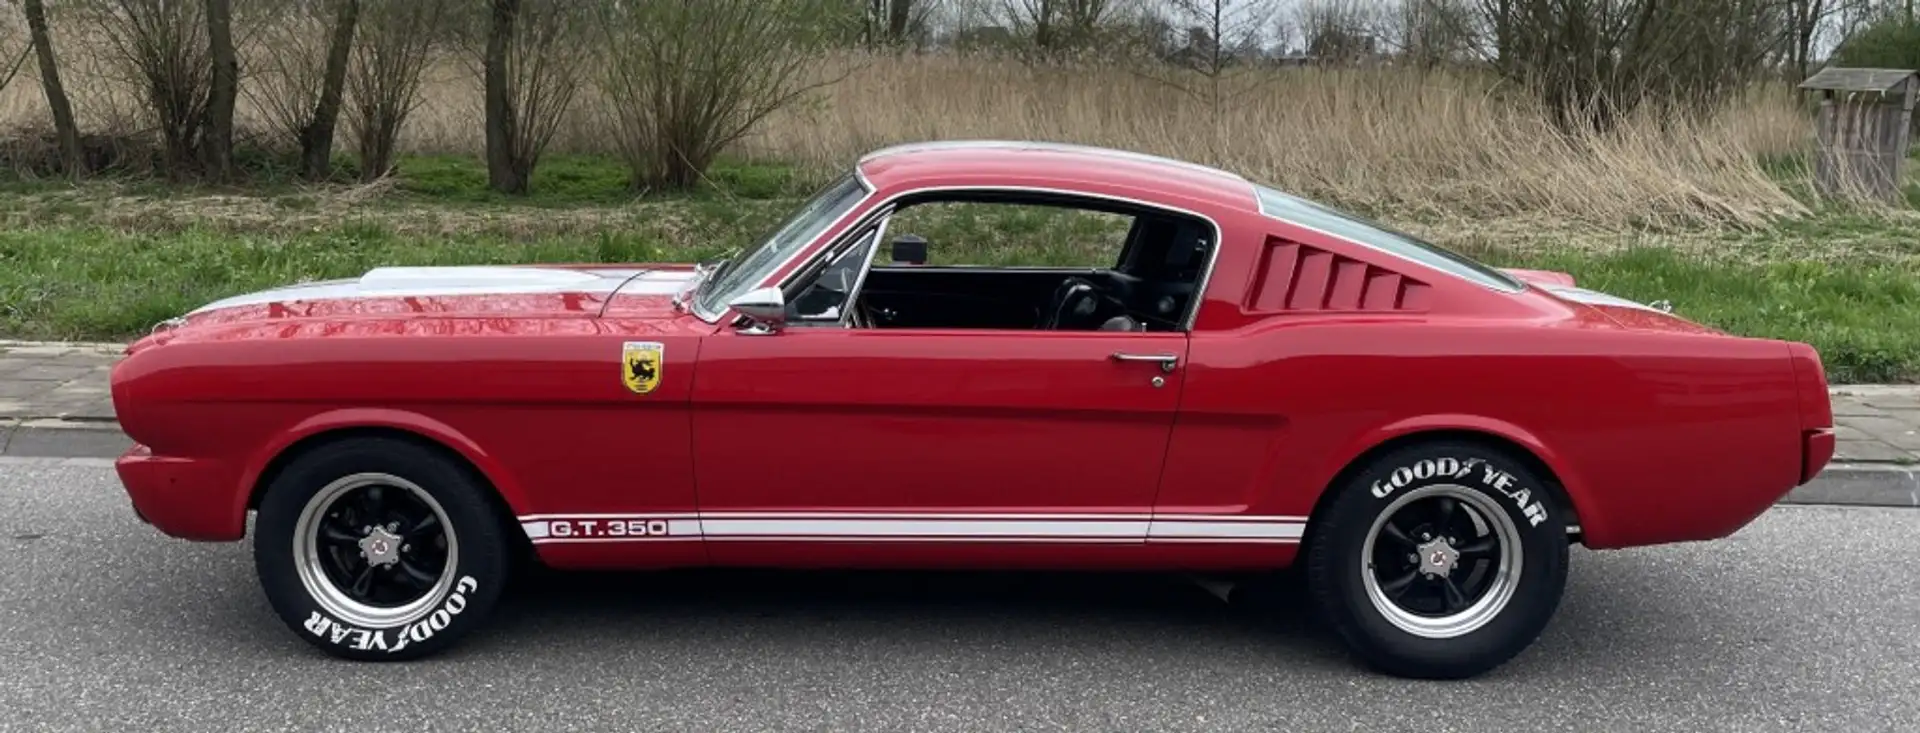 Ford Mustang Fastback GT350 Tribute Rojo - 2